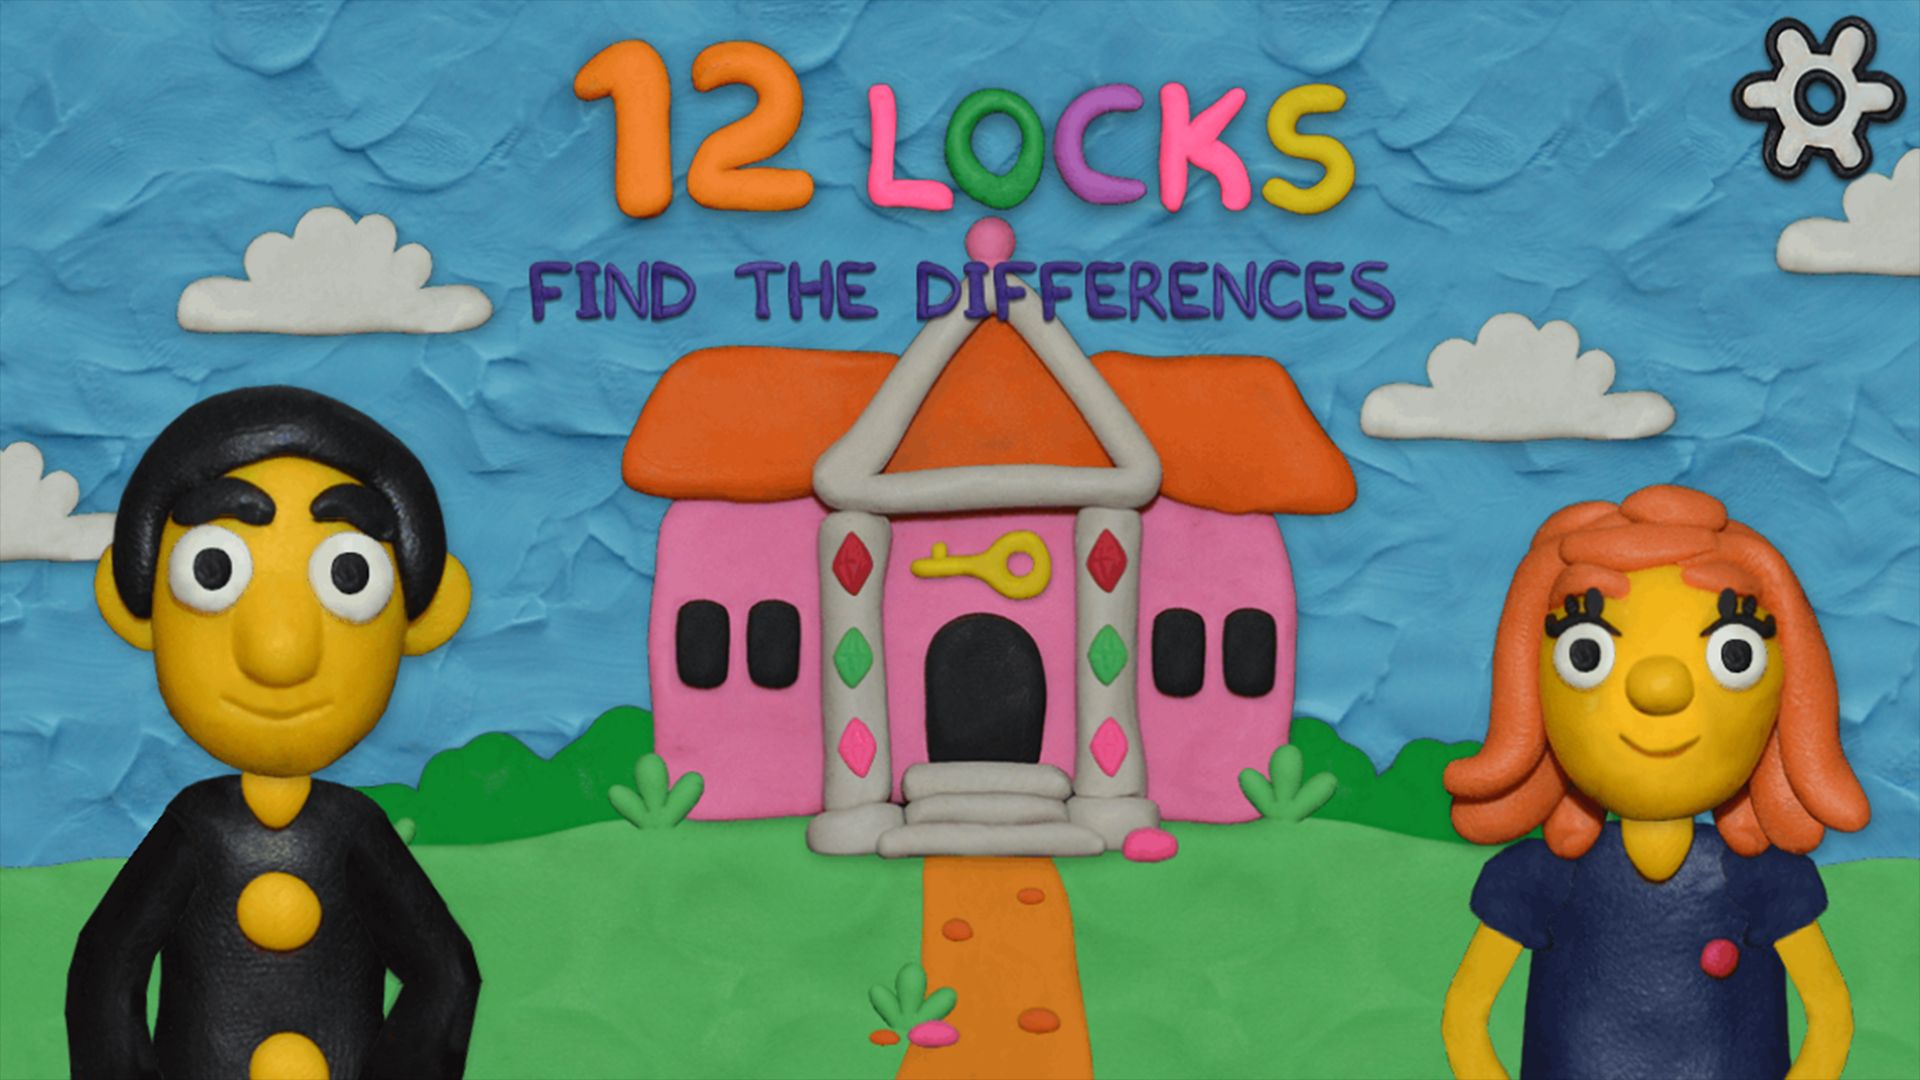 Baixar 12 Locks Find the differences para Android A.n.d.r.o.i.d. .5...0. .a.n.d. .m.o.r.e grátis.